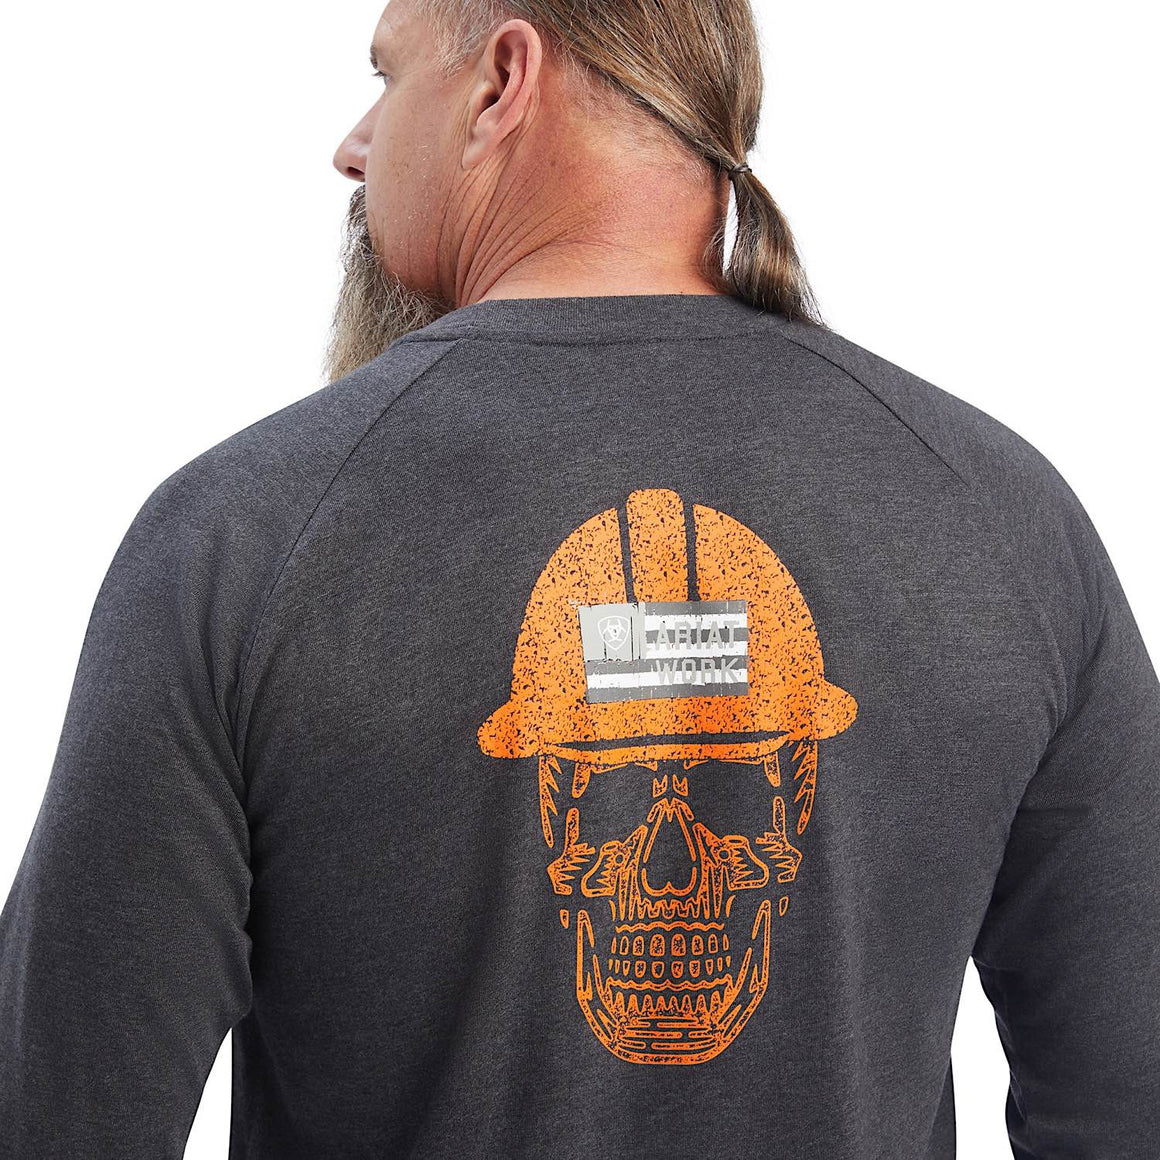 ARIAT Mens Rebar Cotton Strong Roughneck Graphic L/S T-Shirt Charcoal Grey/ Safety Orange